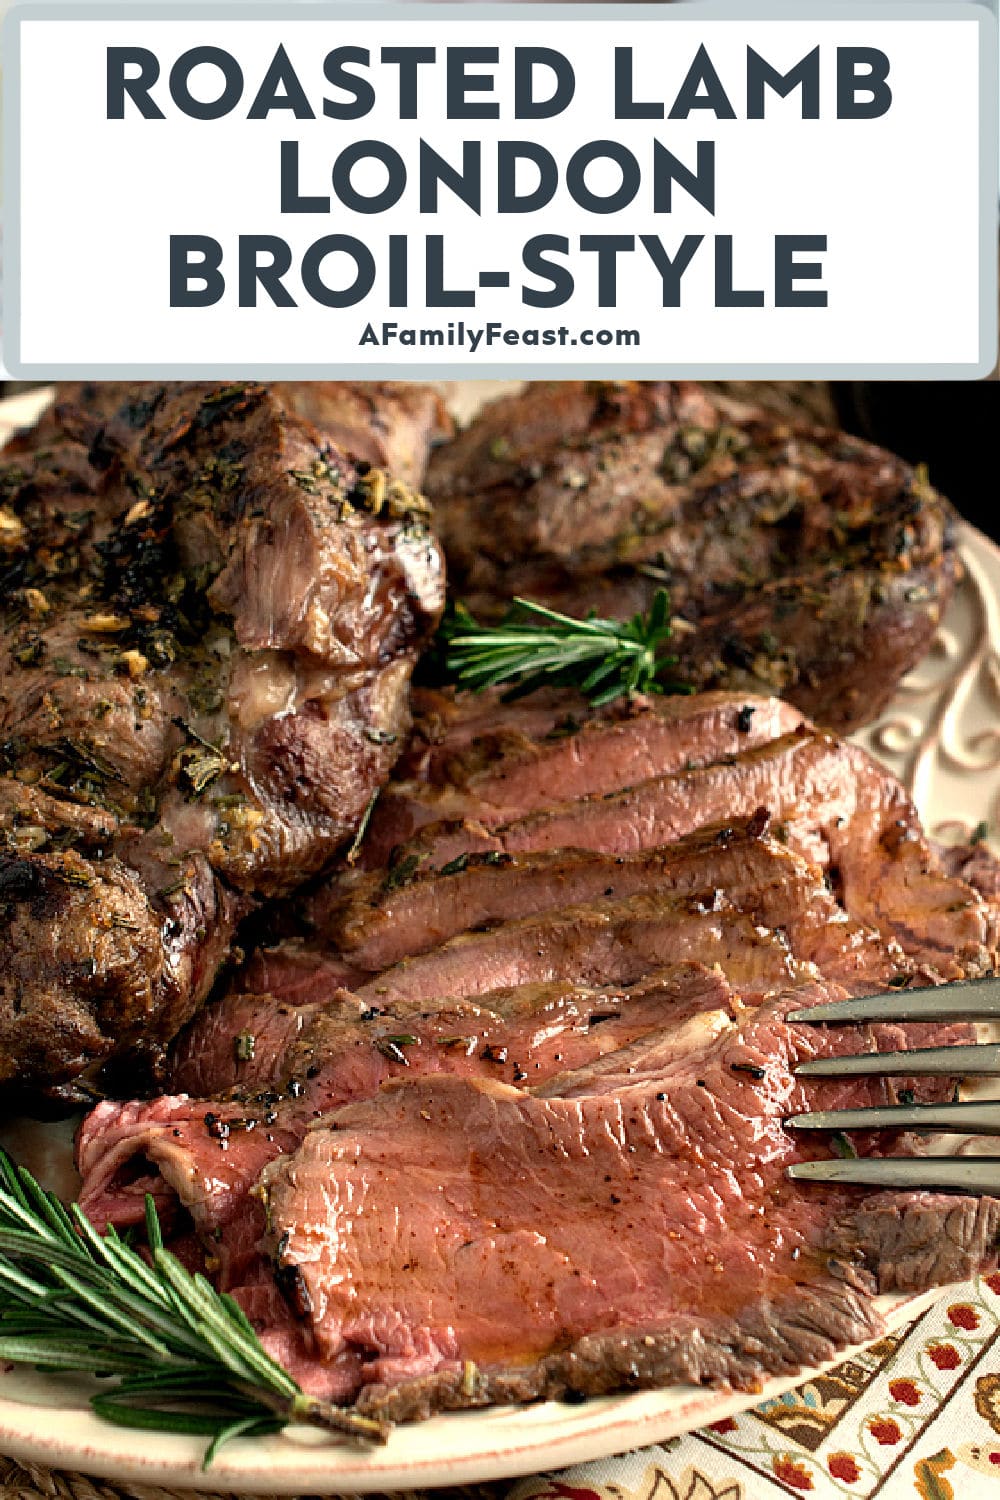 Roasted Lamb London Broil-Style 1